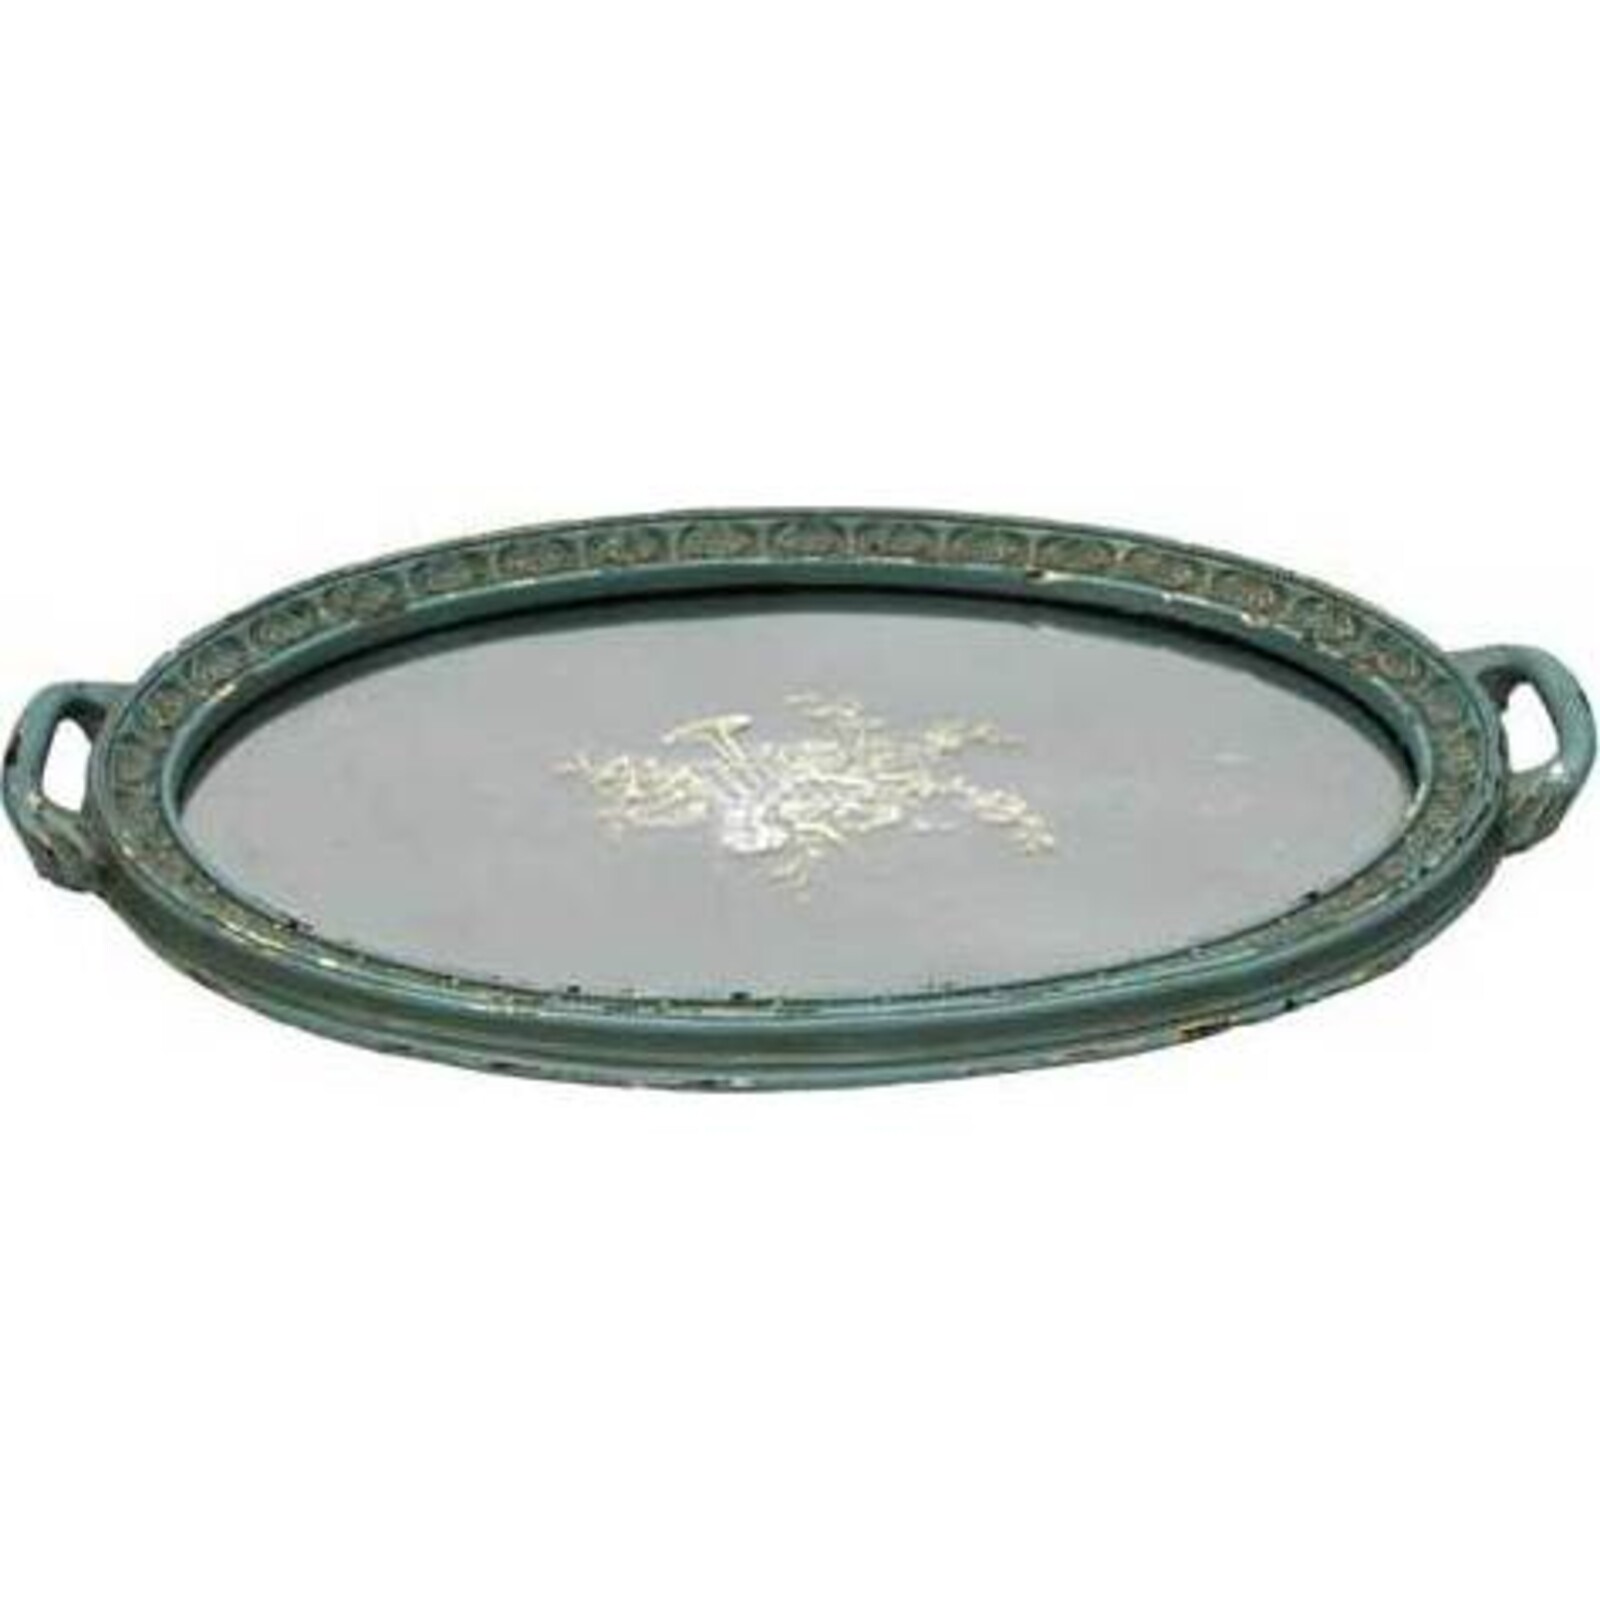 Mirror Tray Rustic Oval